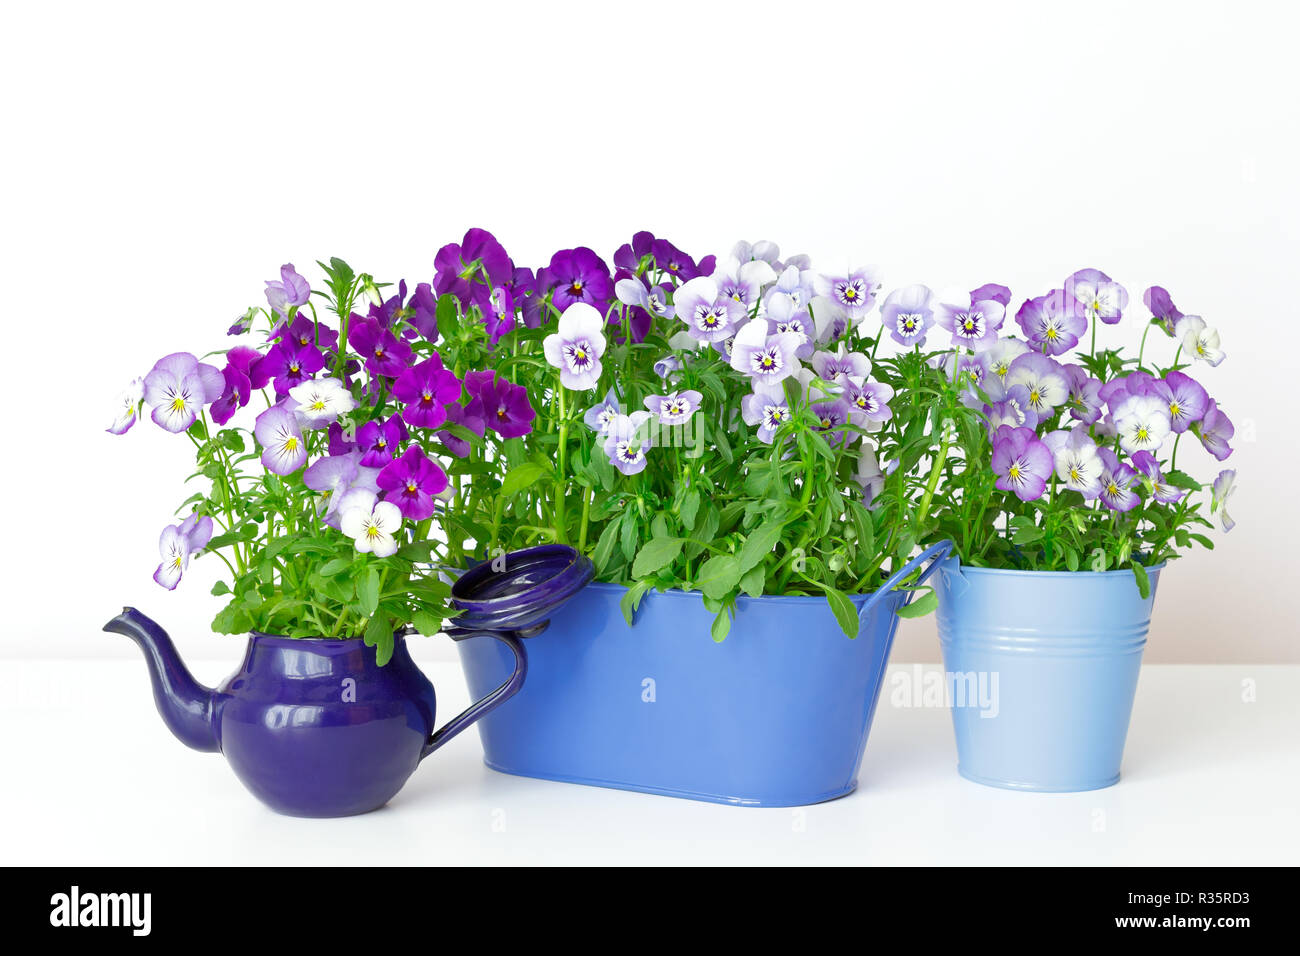 Pansy flowers in shades of lilac, violet and blue in 2 pots and a vintage enamel jug on white background, copy or text space Stock Photo